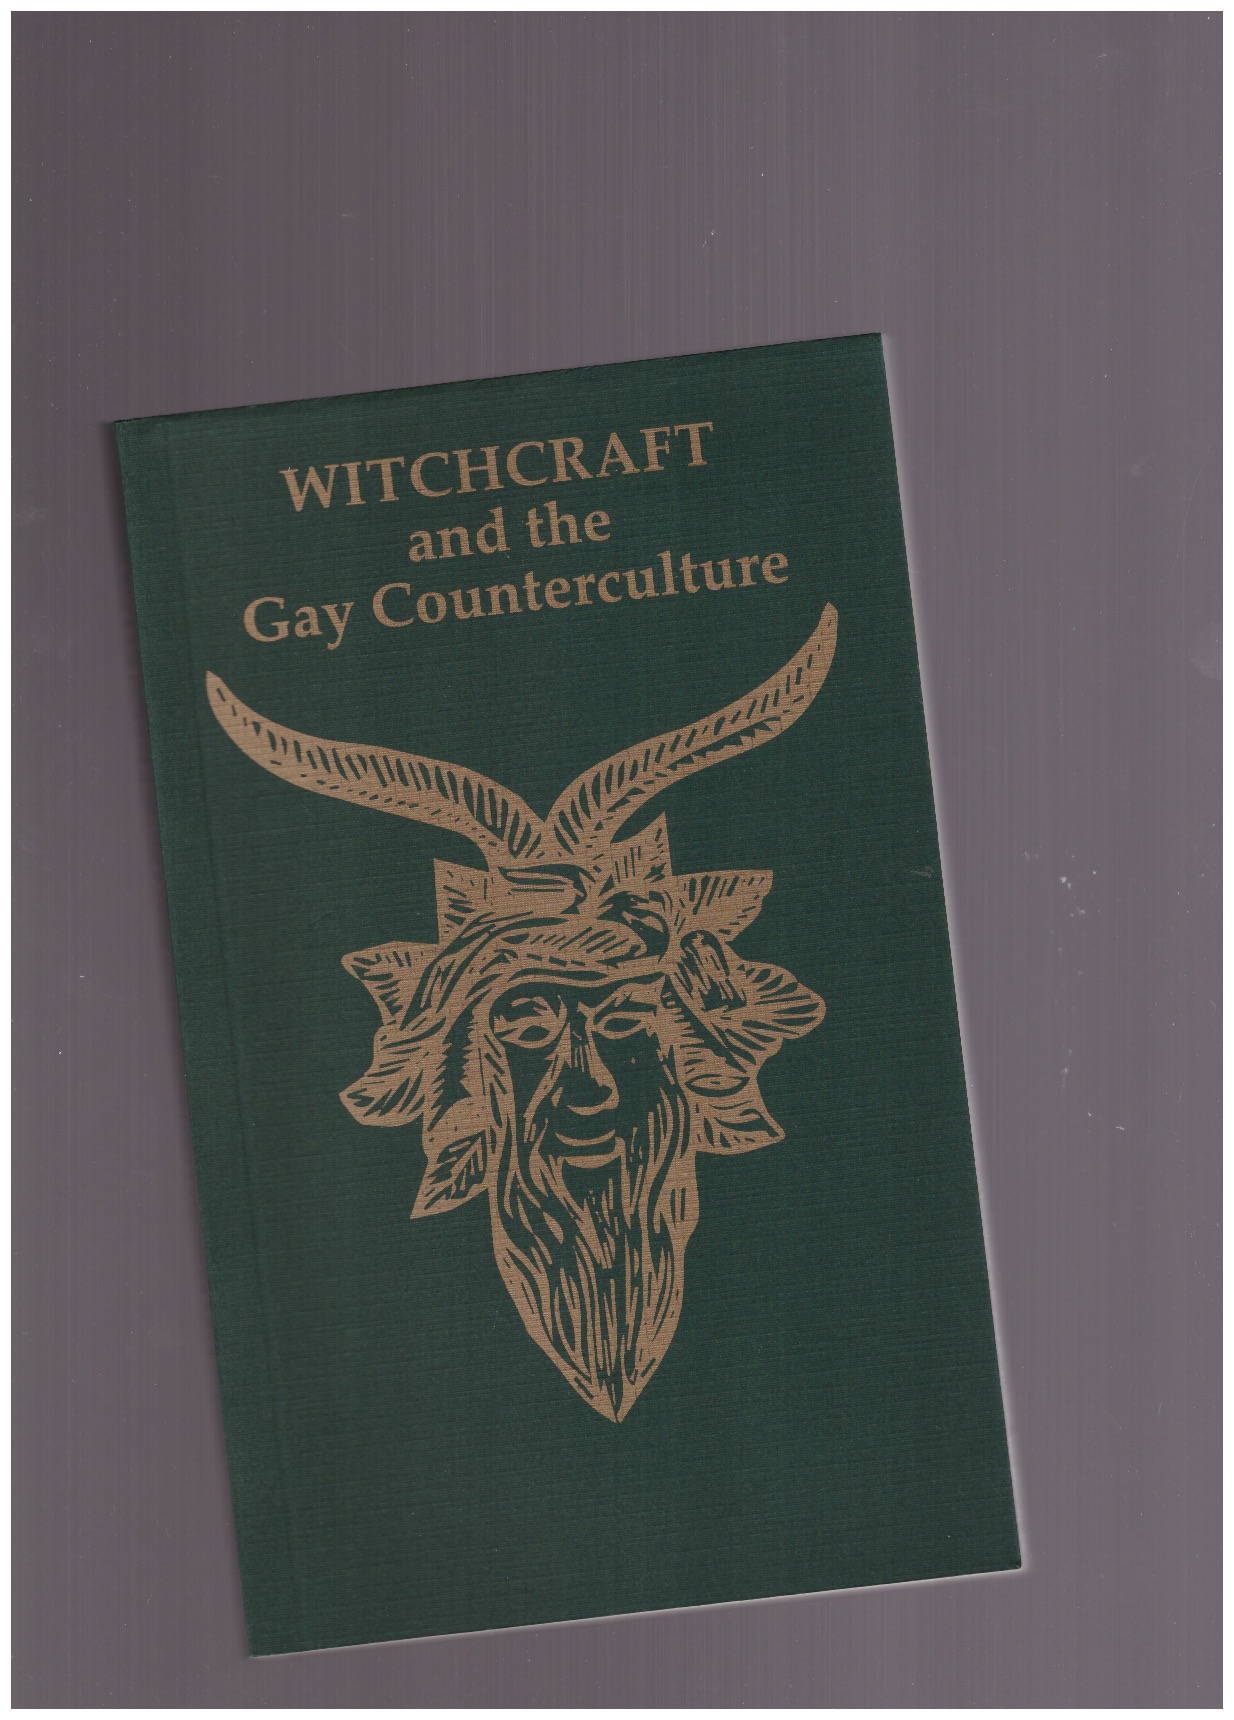 EVANS, Arthur - Witchcraft and the Gay Counterculture